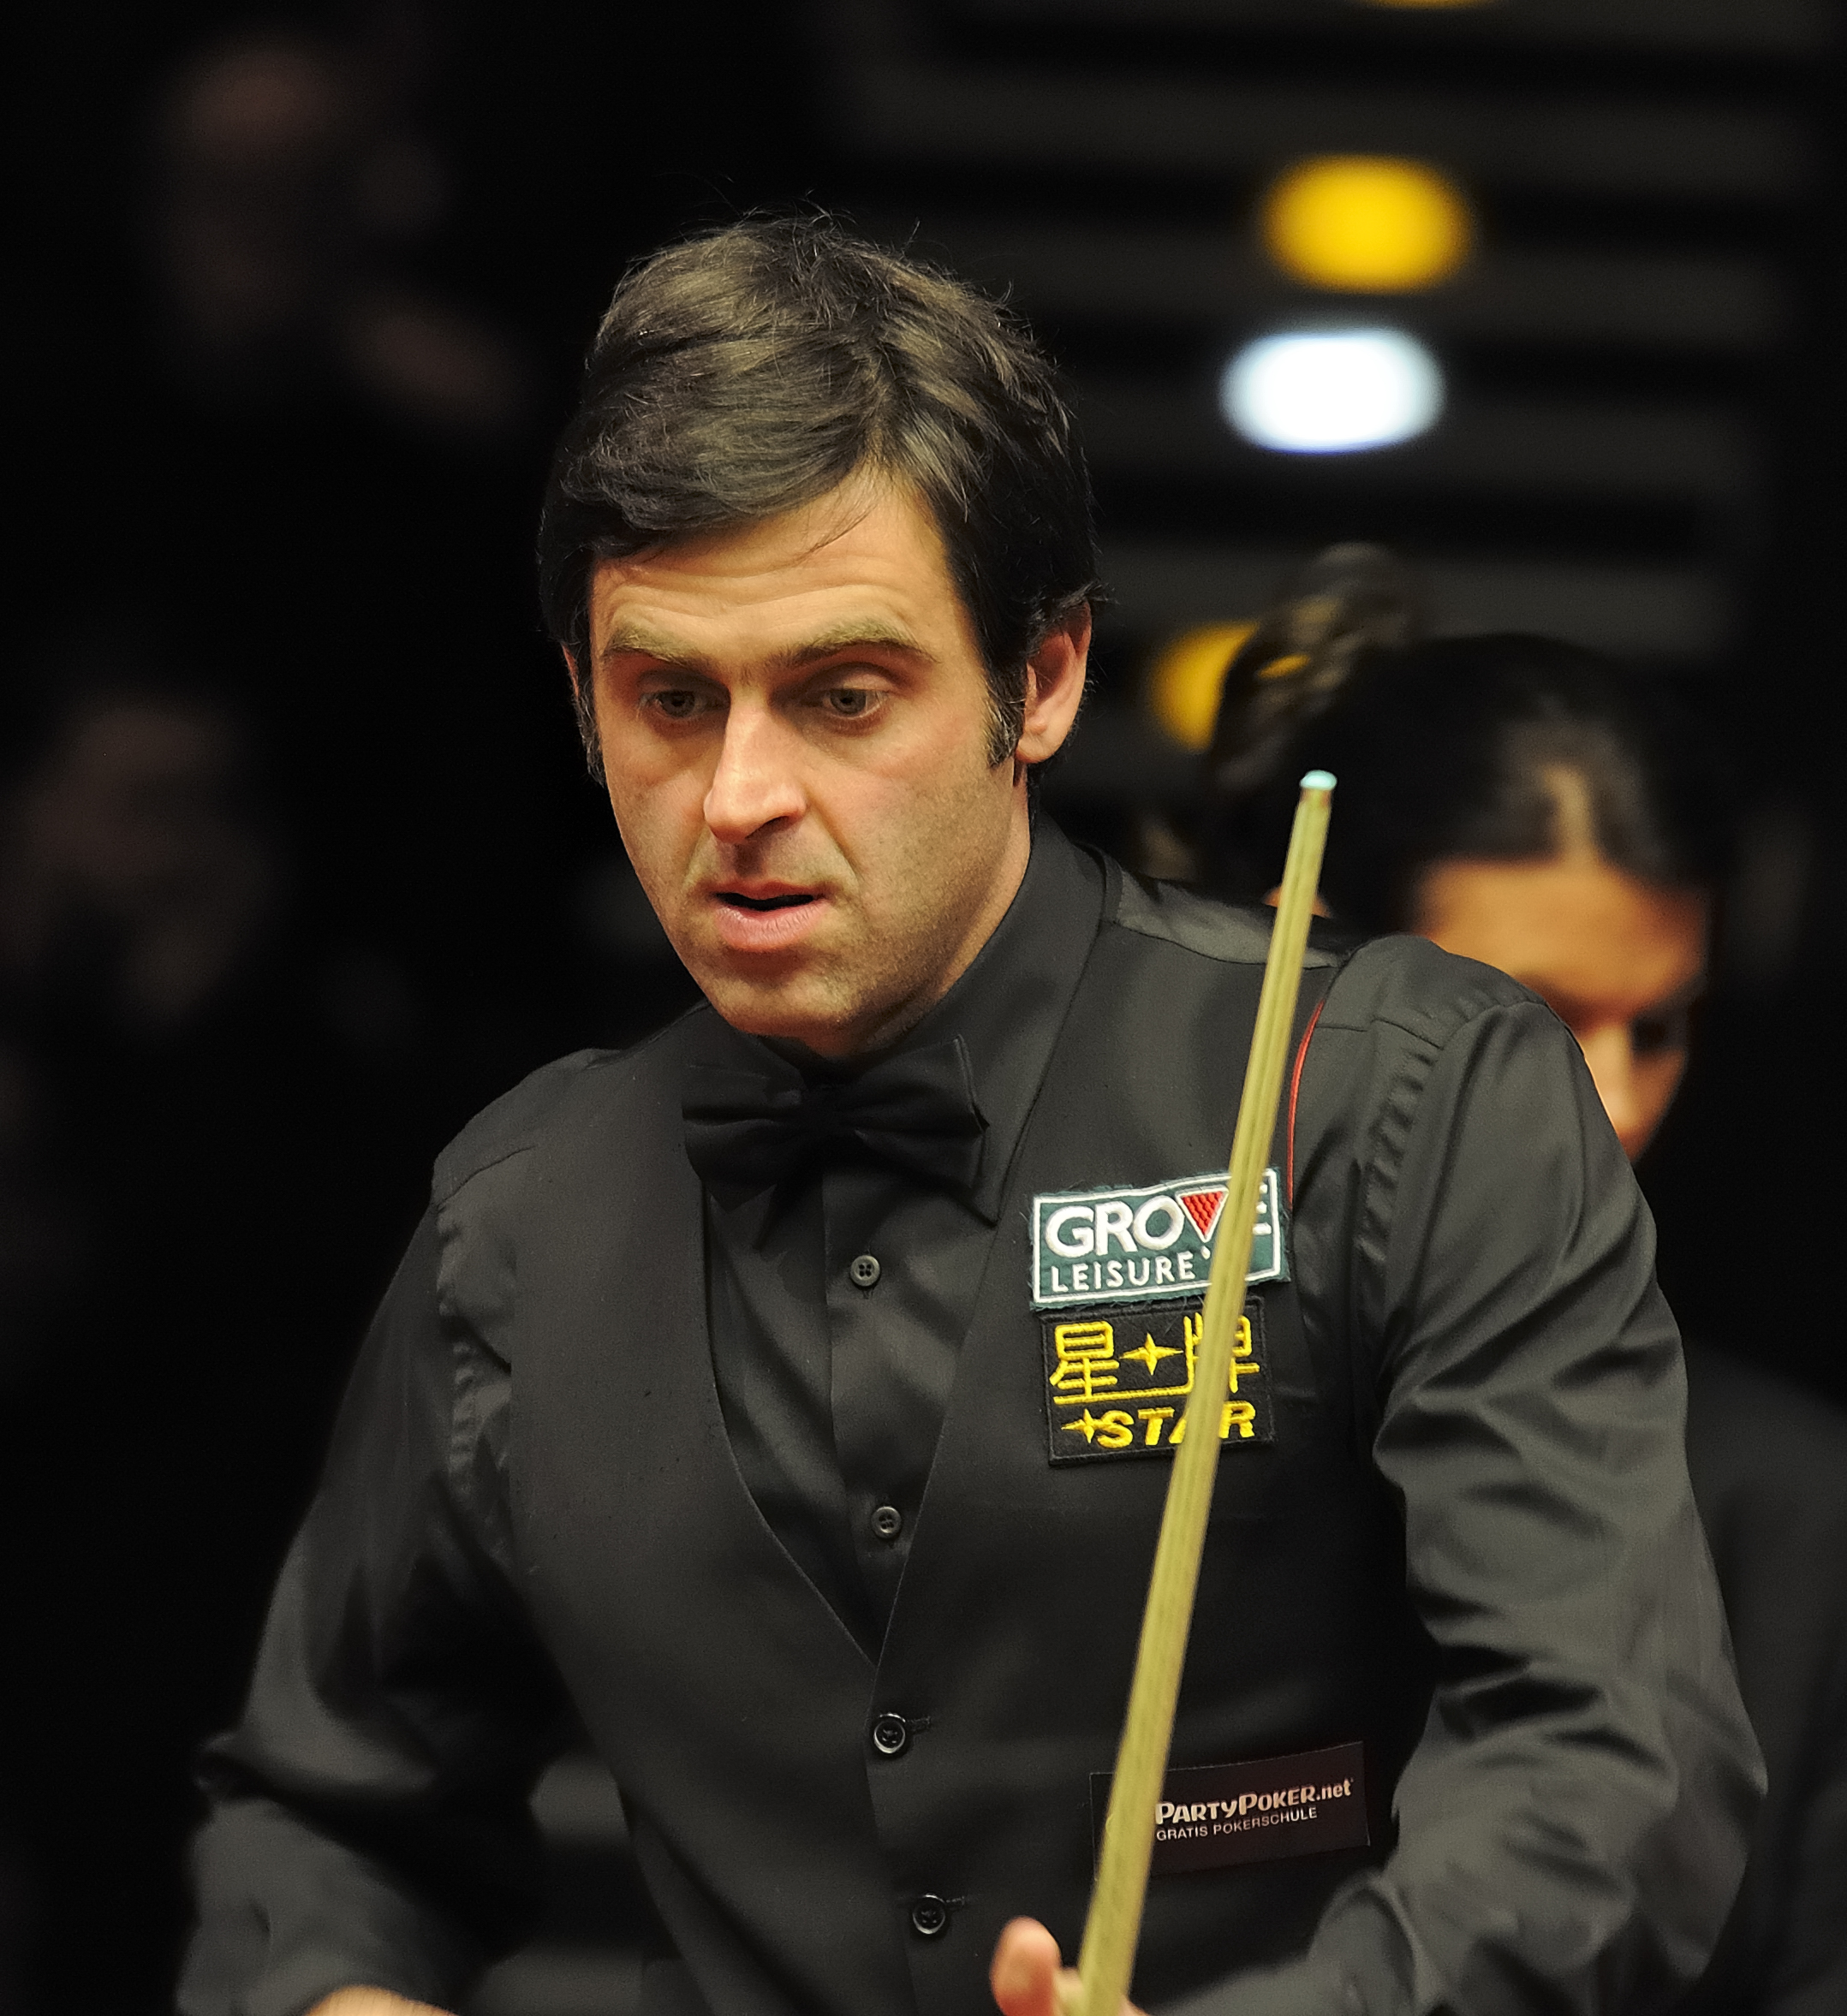 Ronnie O'Sullivan And Michaela Tabb At German Masters Snooker Final (DerHexer) 2012 02 05